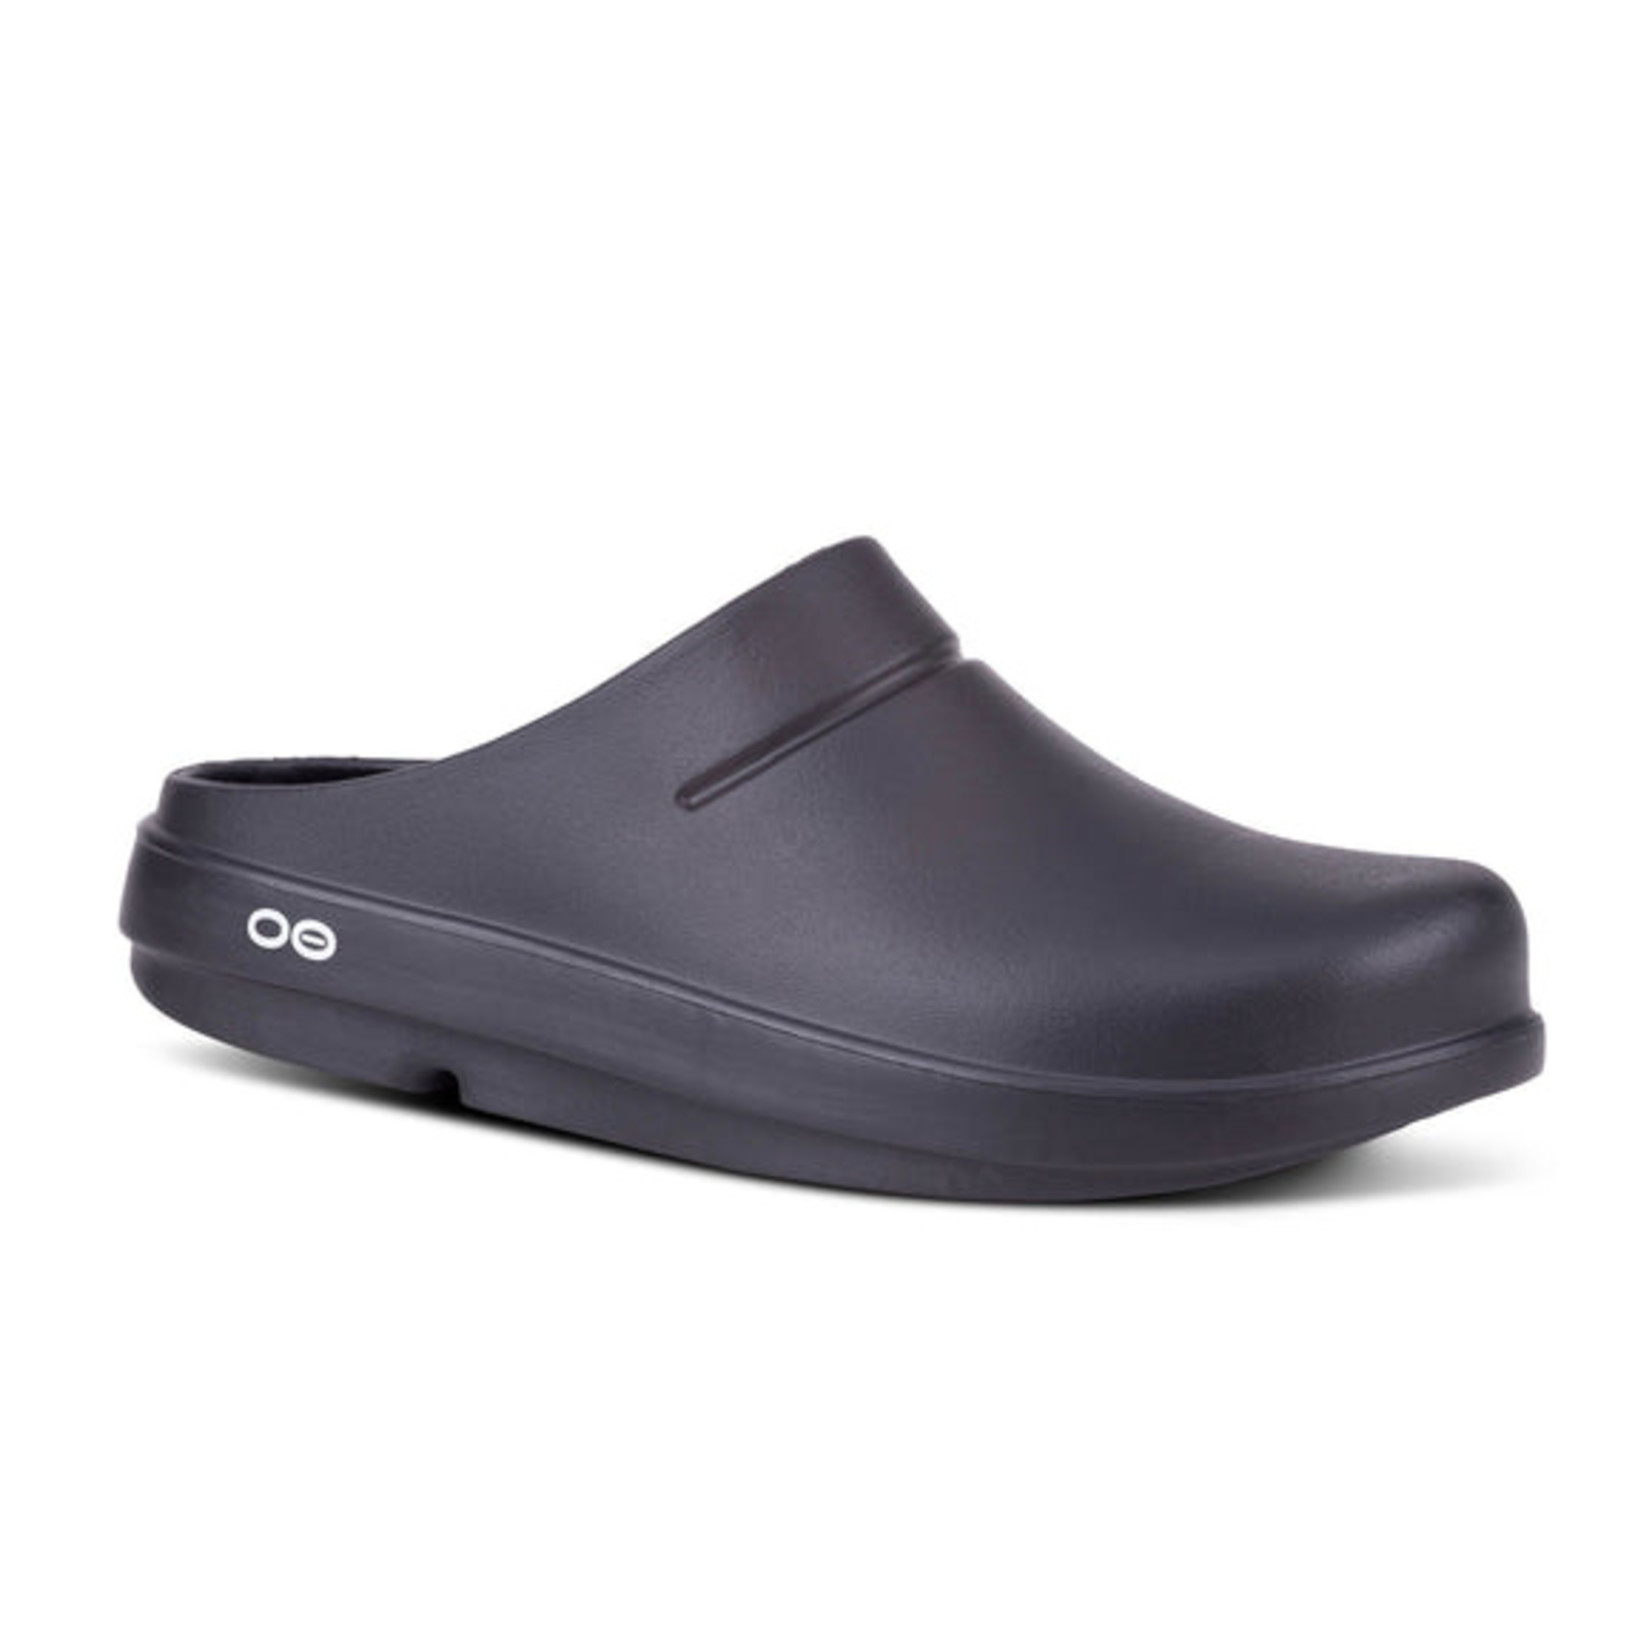 Oofos Ooclog 1200 Unisex Clogs - Shippy Shoes